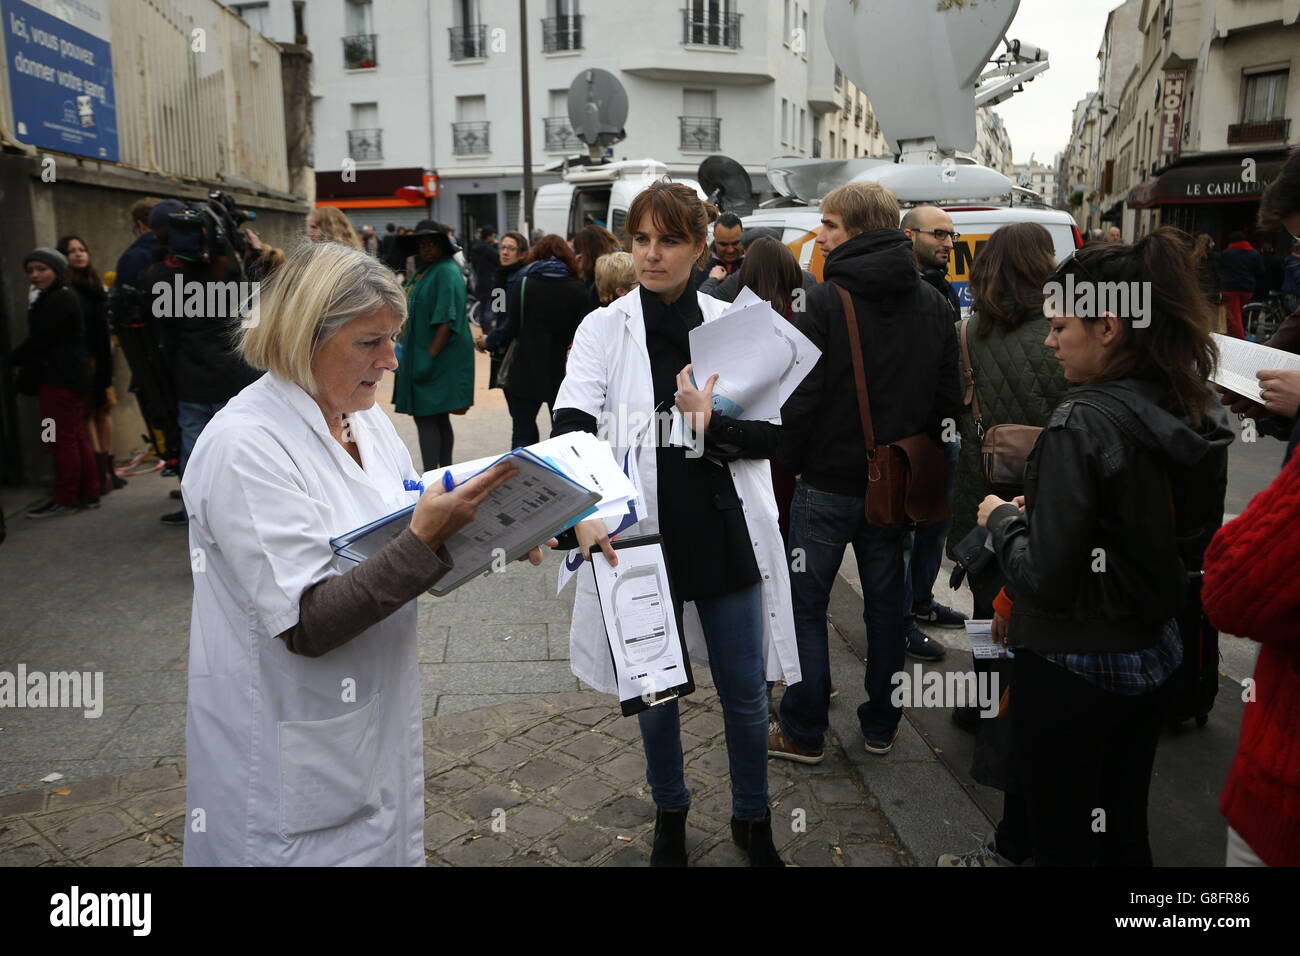 People queue to give blood at a makeshift centre near to the Le Petit Cambodge, Paris, one of the venues for the attacks in the French capital which are feared to have killed around 127 people. Stock Photo